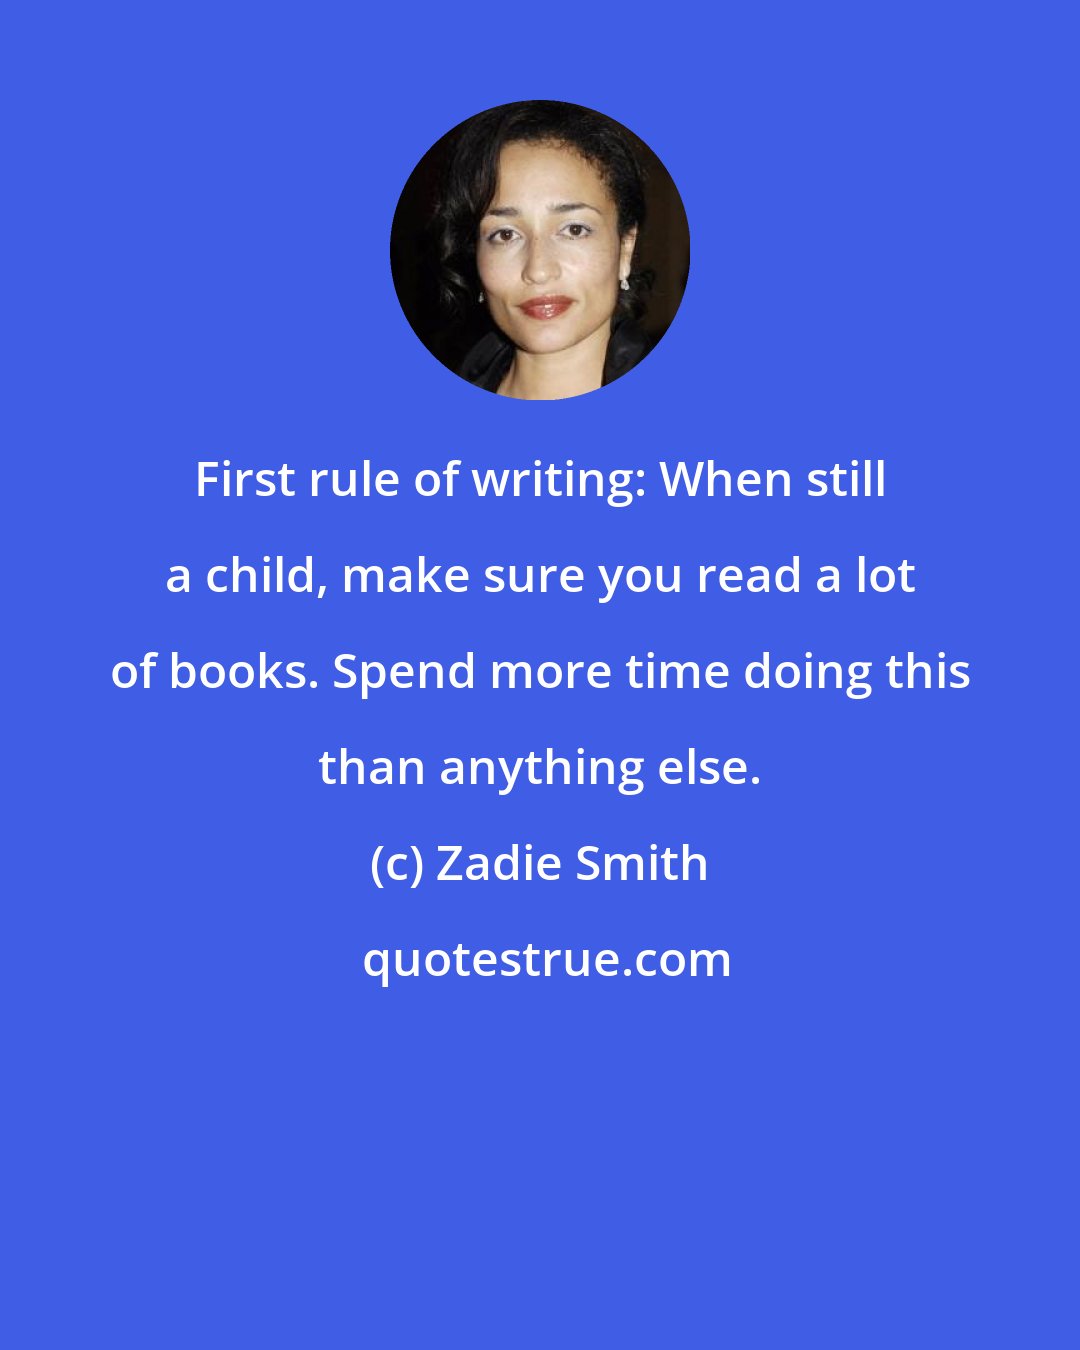 Zadie Smith: First rule of writing: When still a child, make sure you read a lot of books. Spend more time doing this than anything else.